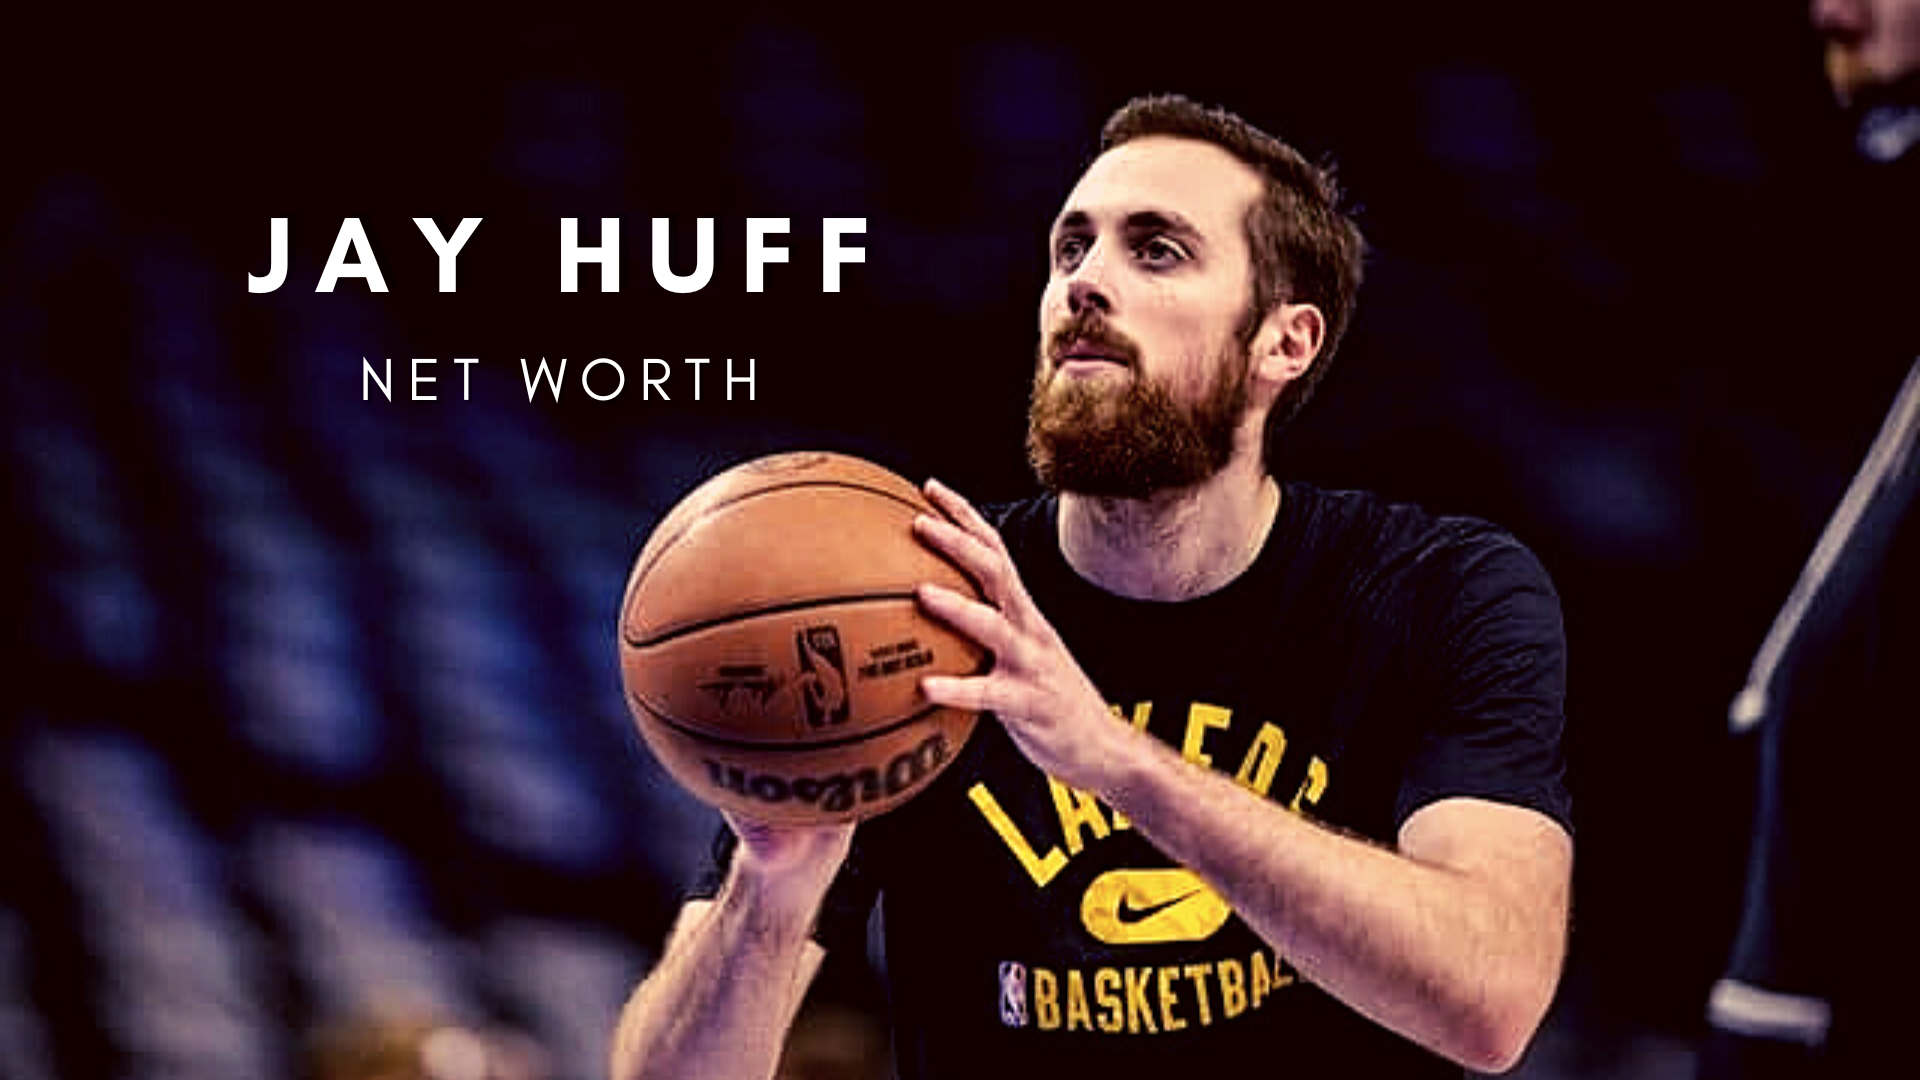 Jay Huff 2022 Net Worth, Salary, Achievements, Records, and Personal